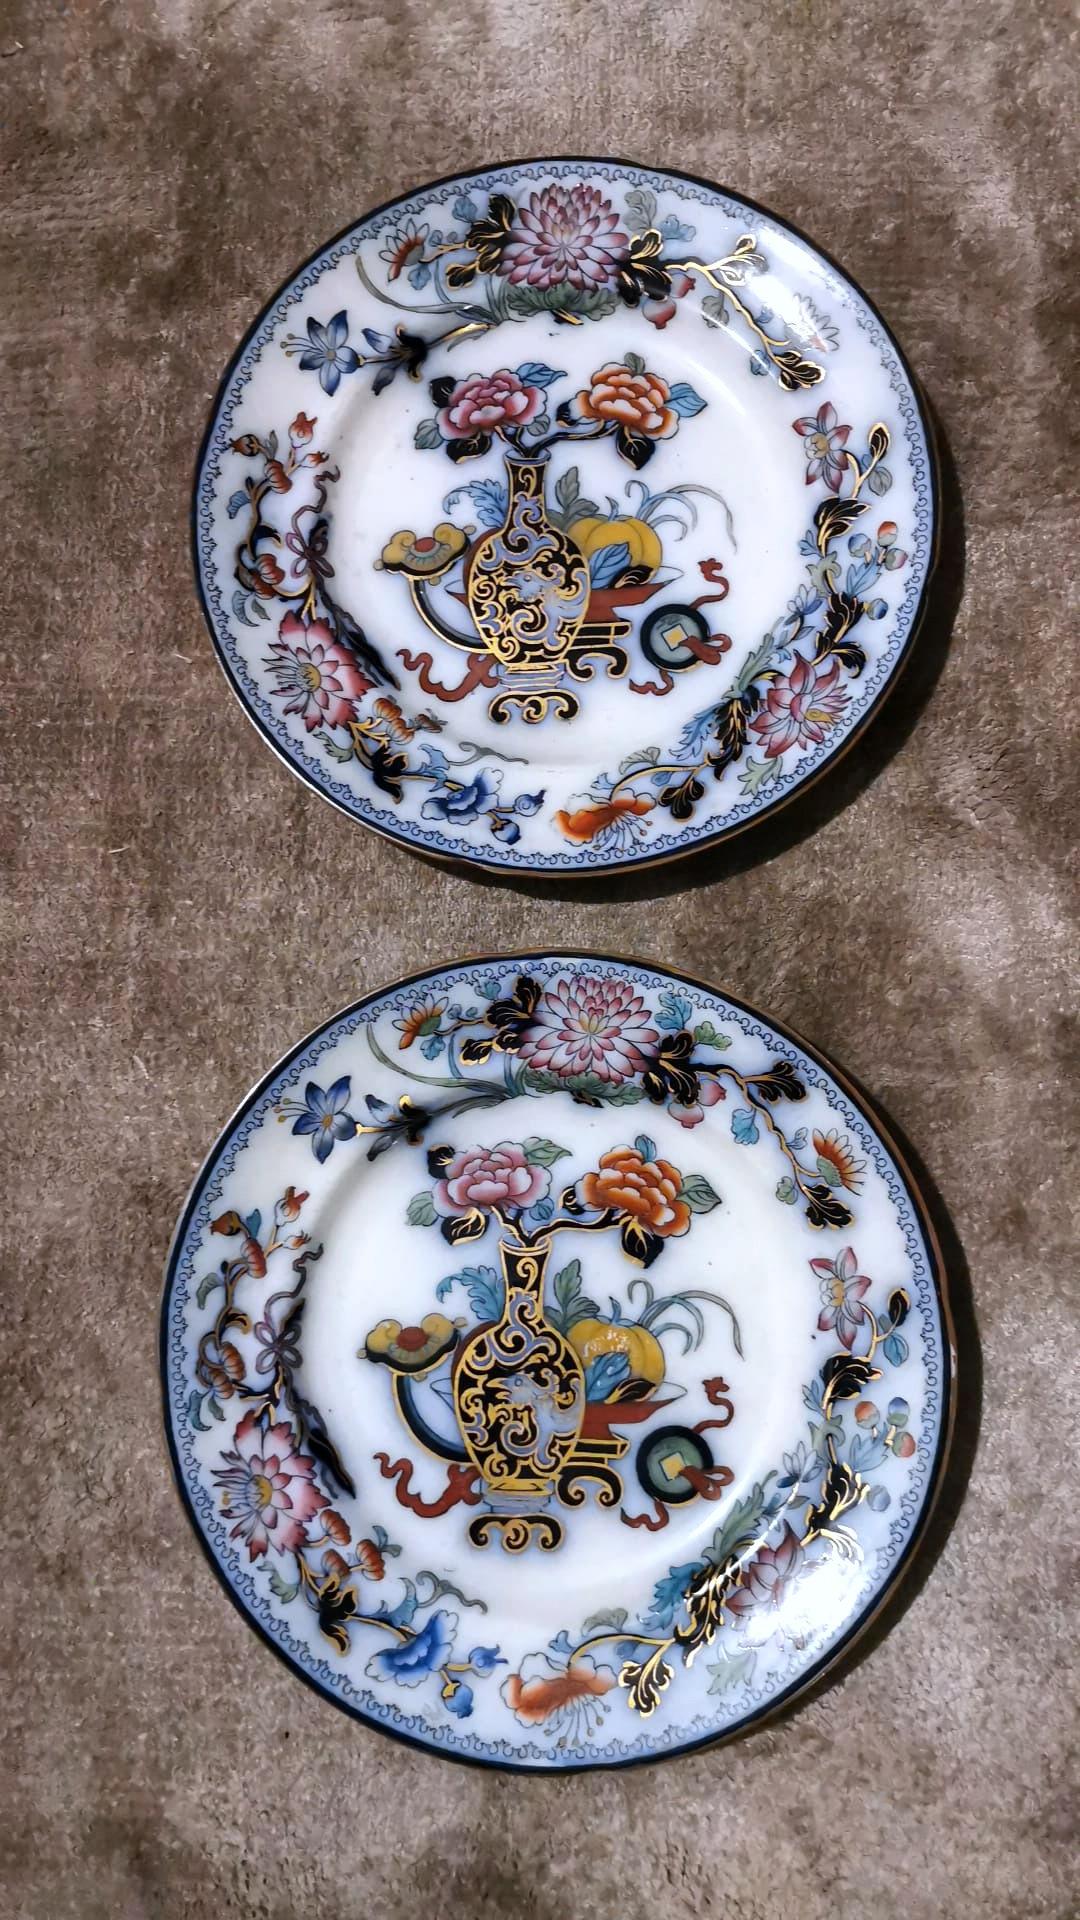 We kindly suggest that you read the entire description, as with it we try to give you detailed technical and historical information to ensure the authenticity of our items
Exceptional and rare pair of English semi-porcelain plates can be used as